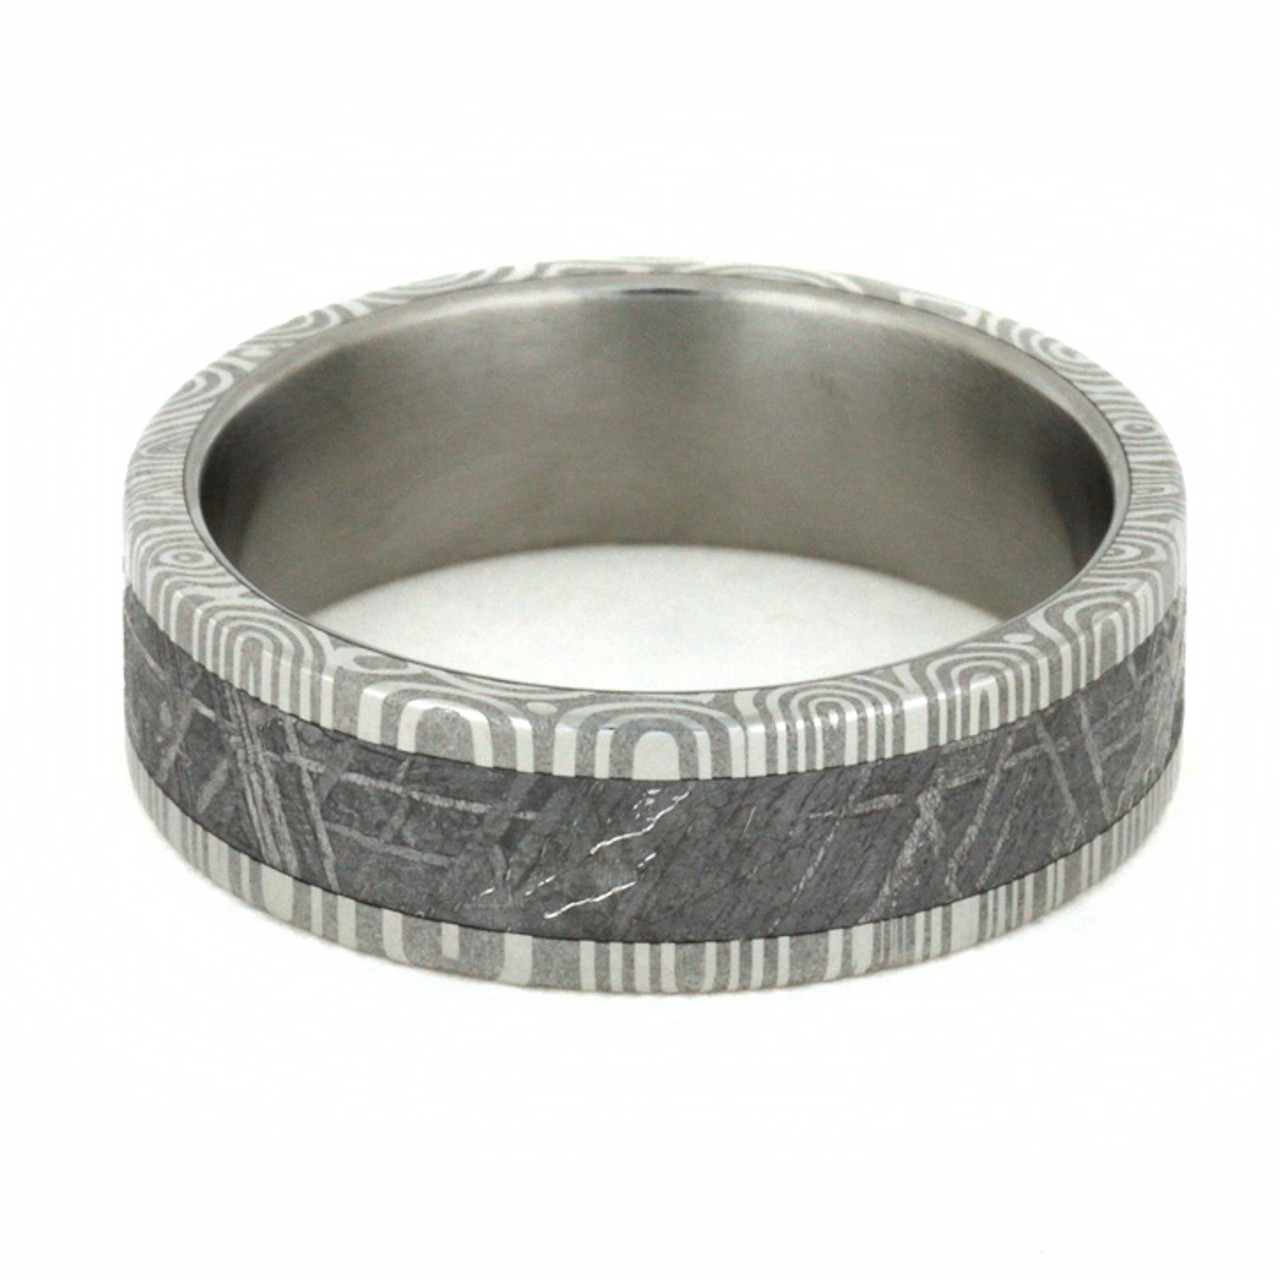 7 mm Damascus Steel and Gibeon Meteorite Wedding Ring - D779M